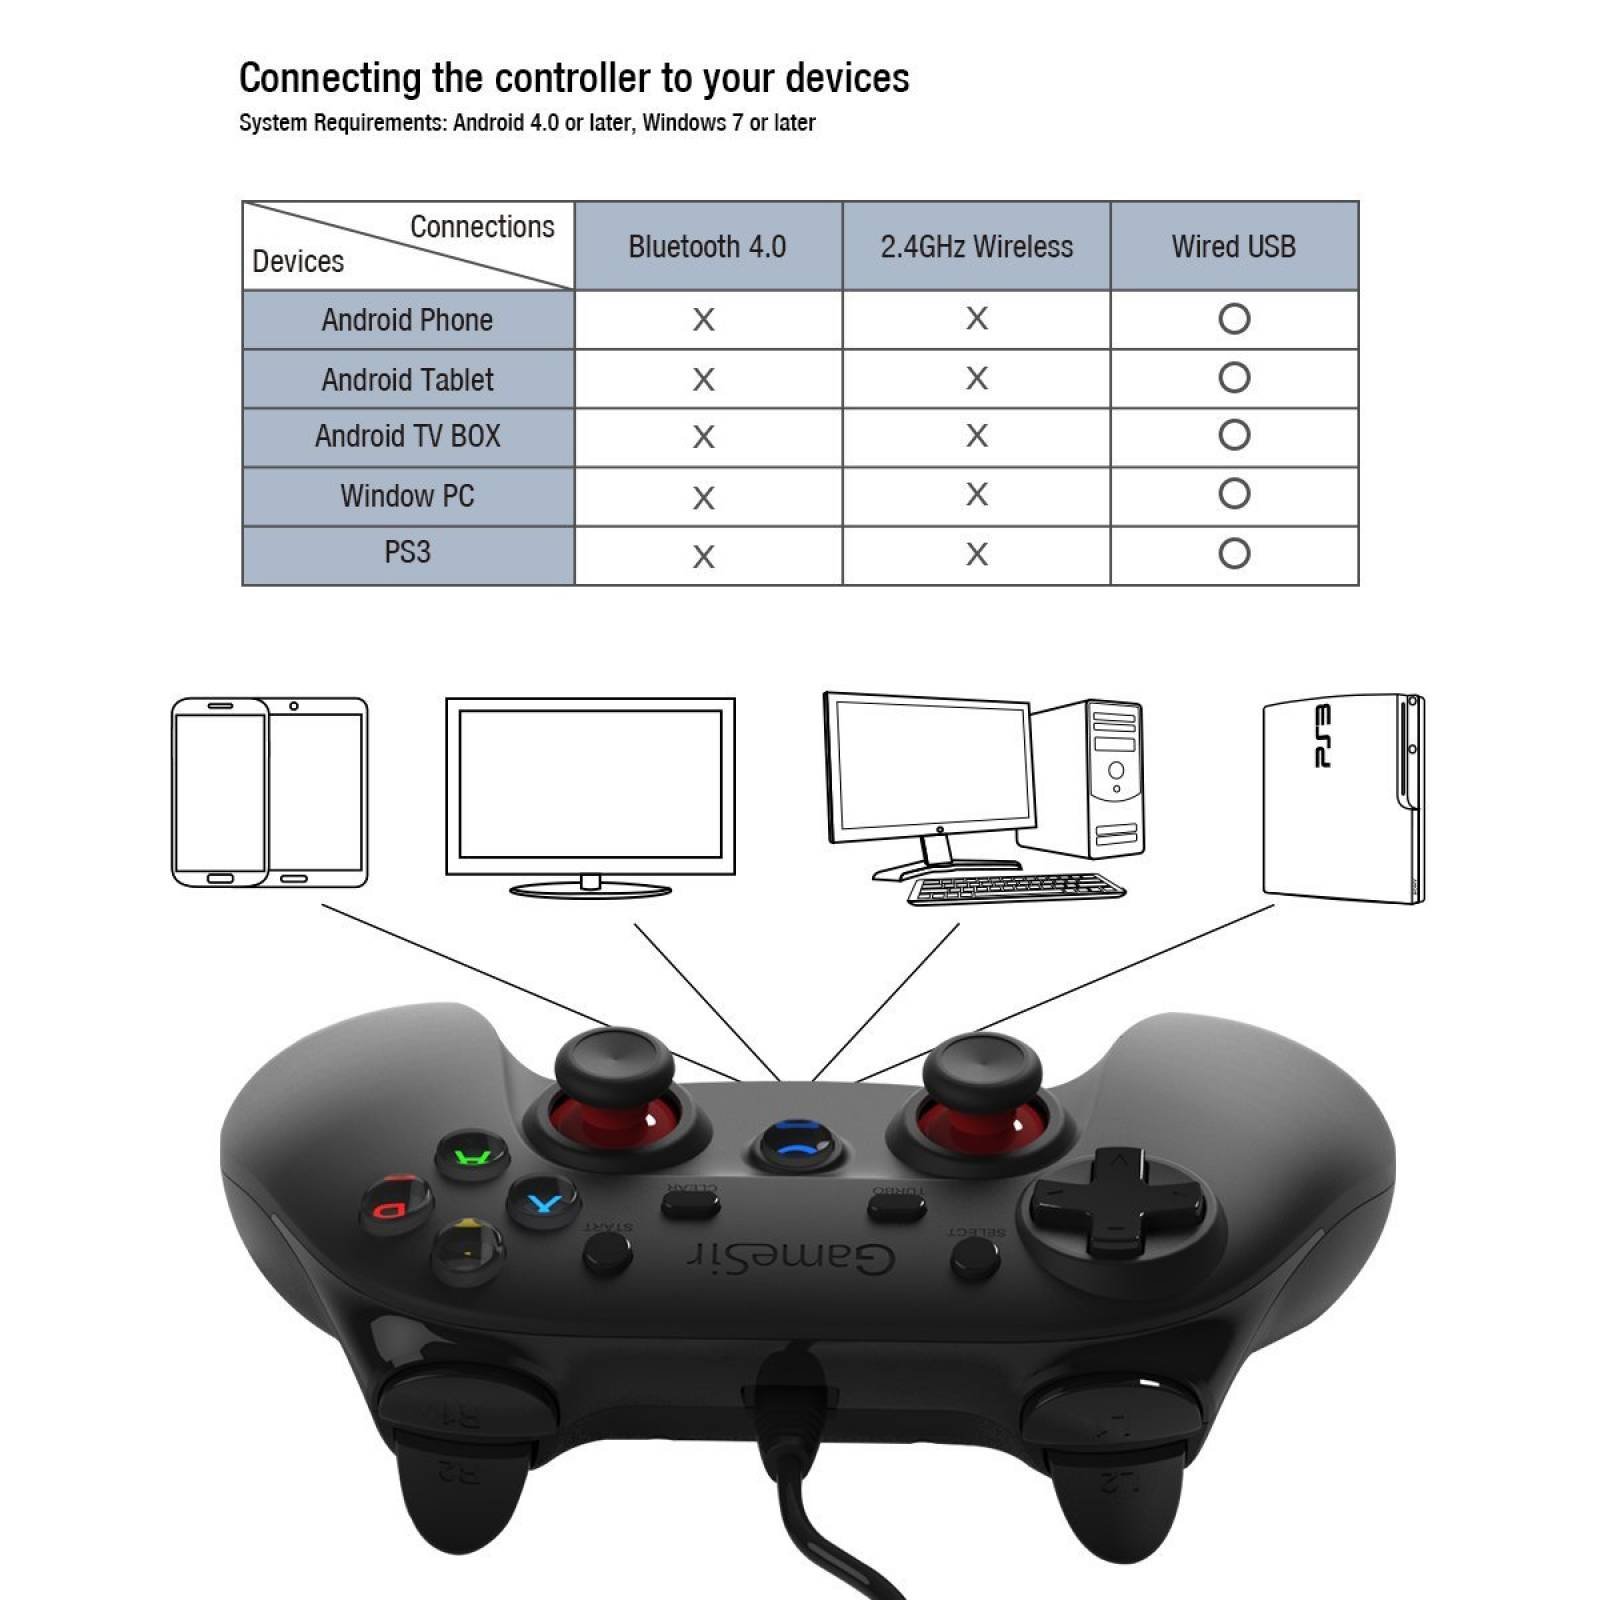 Gamesir G3w cable Gamepad Controller Android Smartphone Tabl